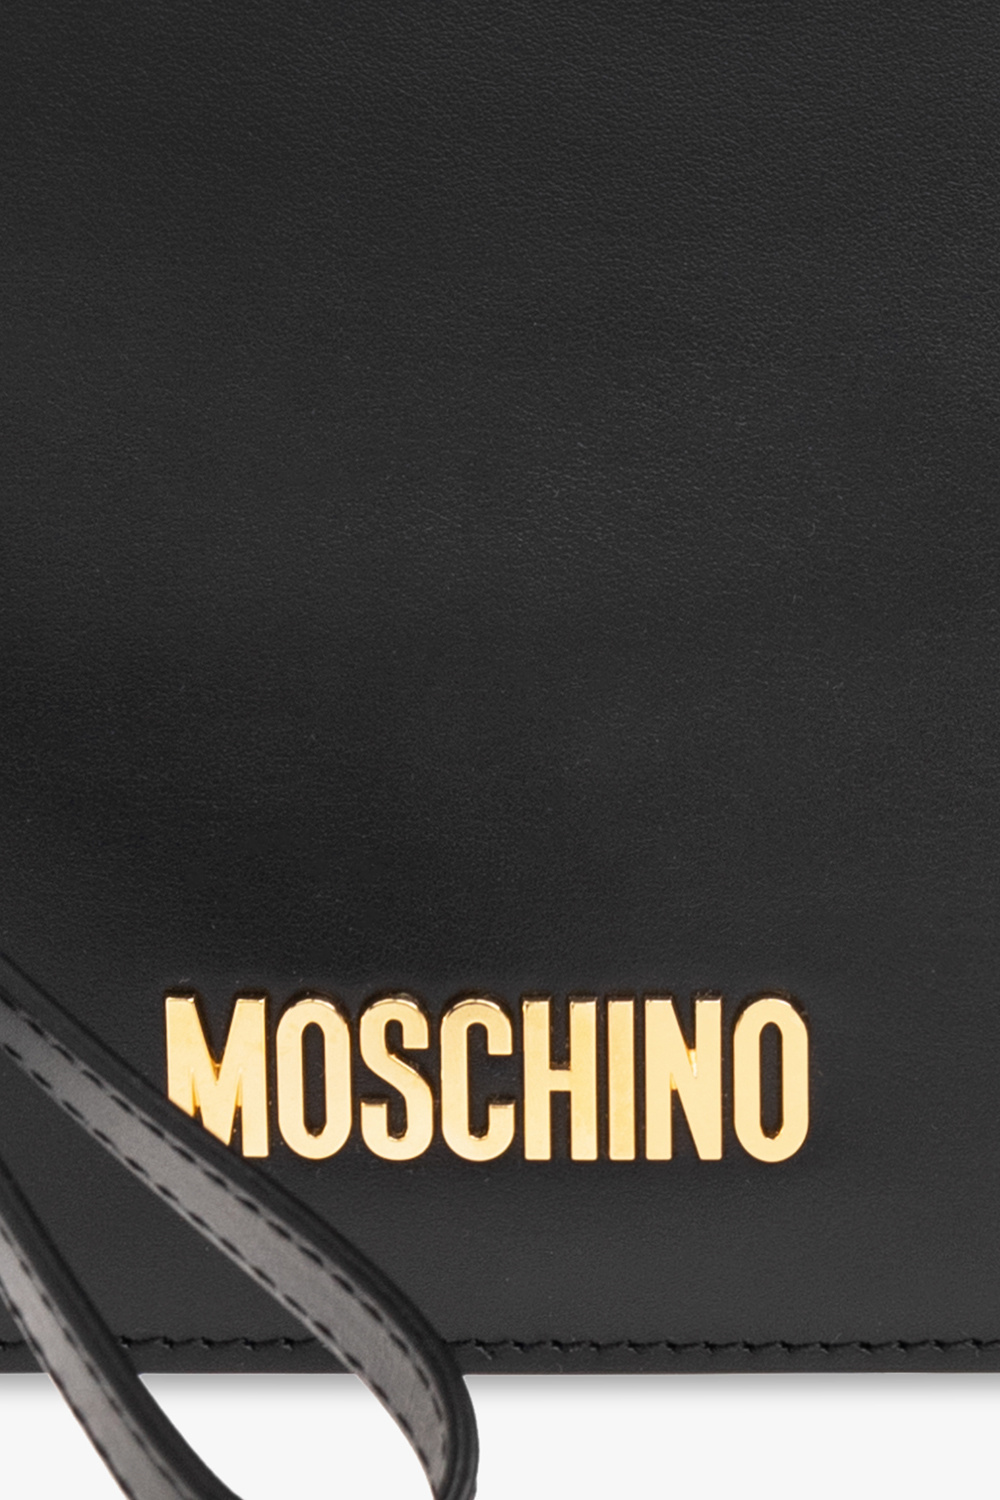 Moschino patterned shoulder bag reflex see by chloe bag